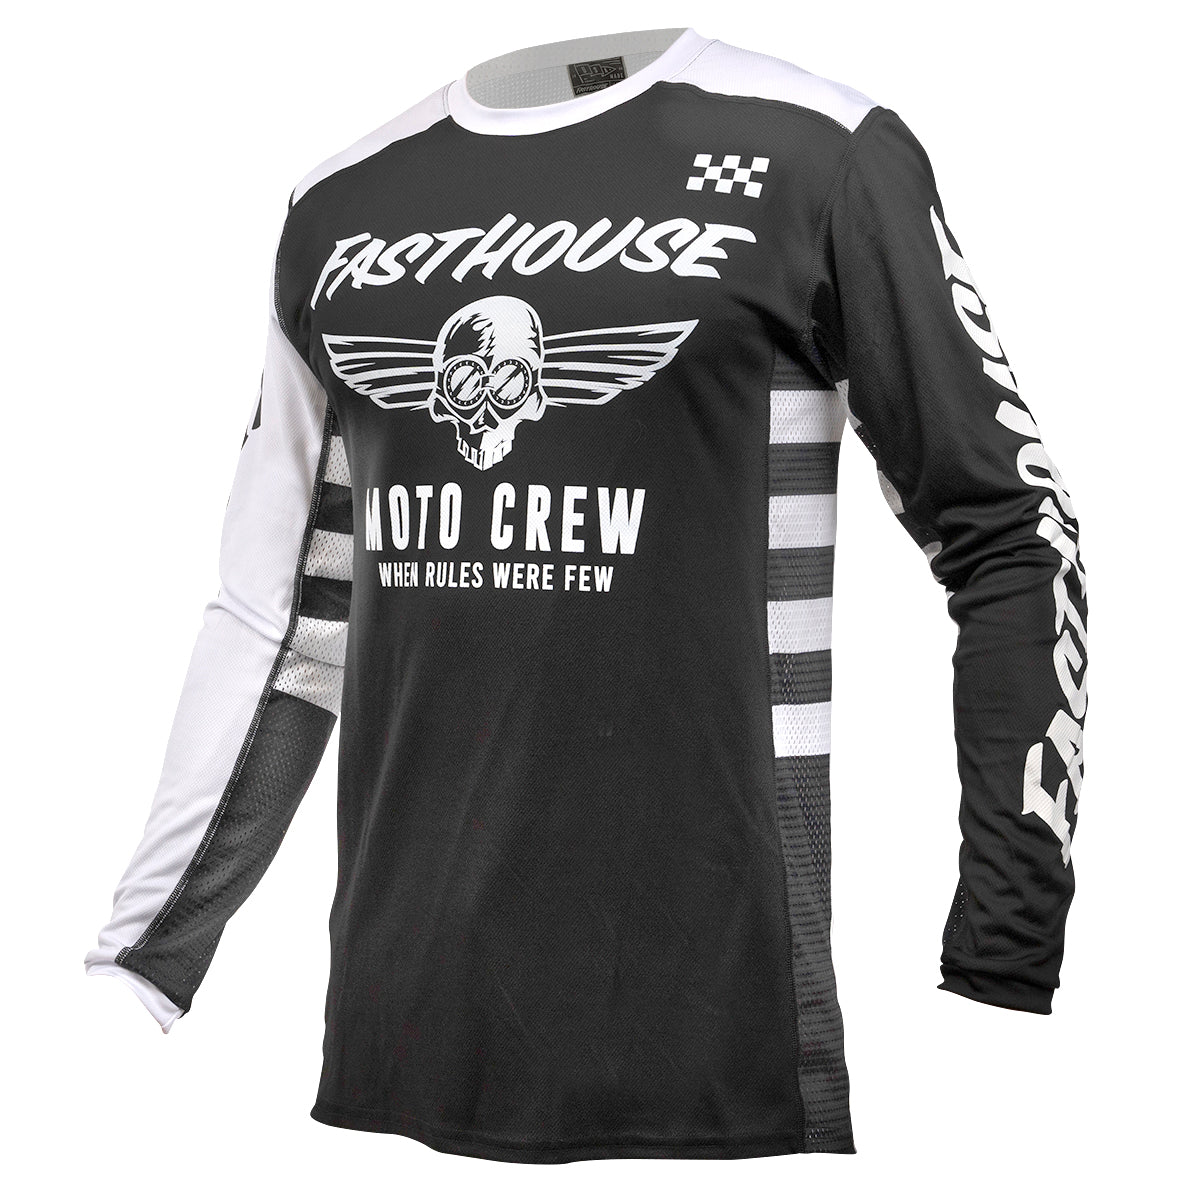 USA Grindhouse Factor Jersey - Black/White